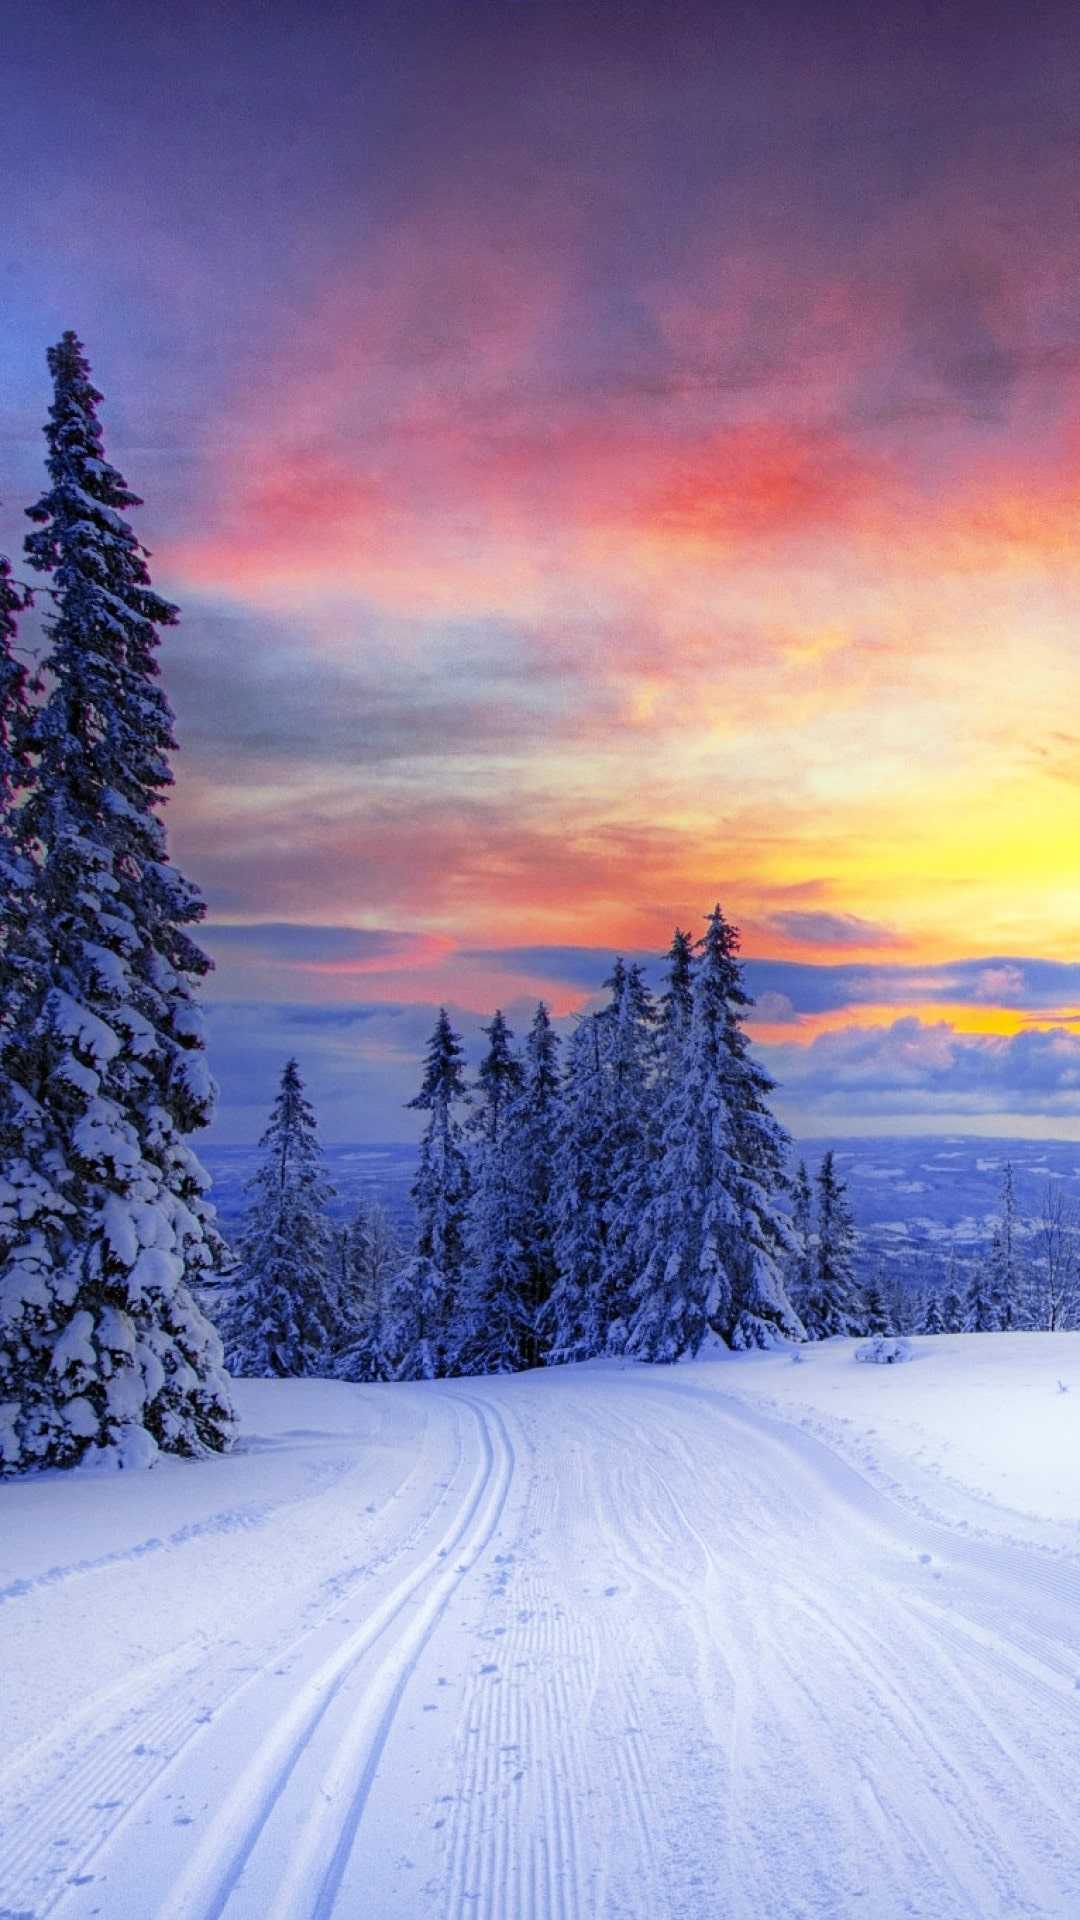 IPhone wallpaper with a beautiful sunset over a snowy landscape - Winter